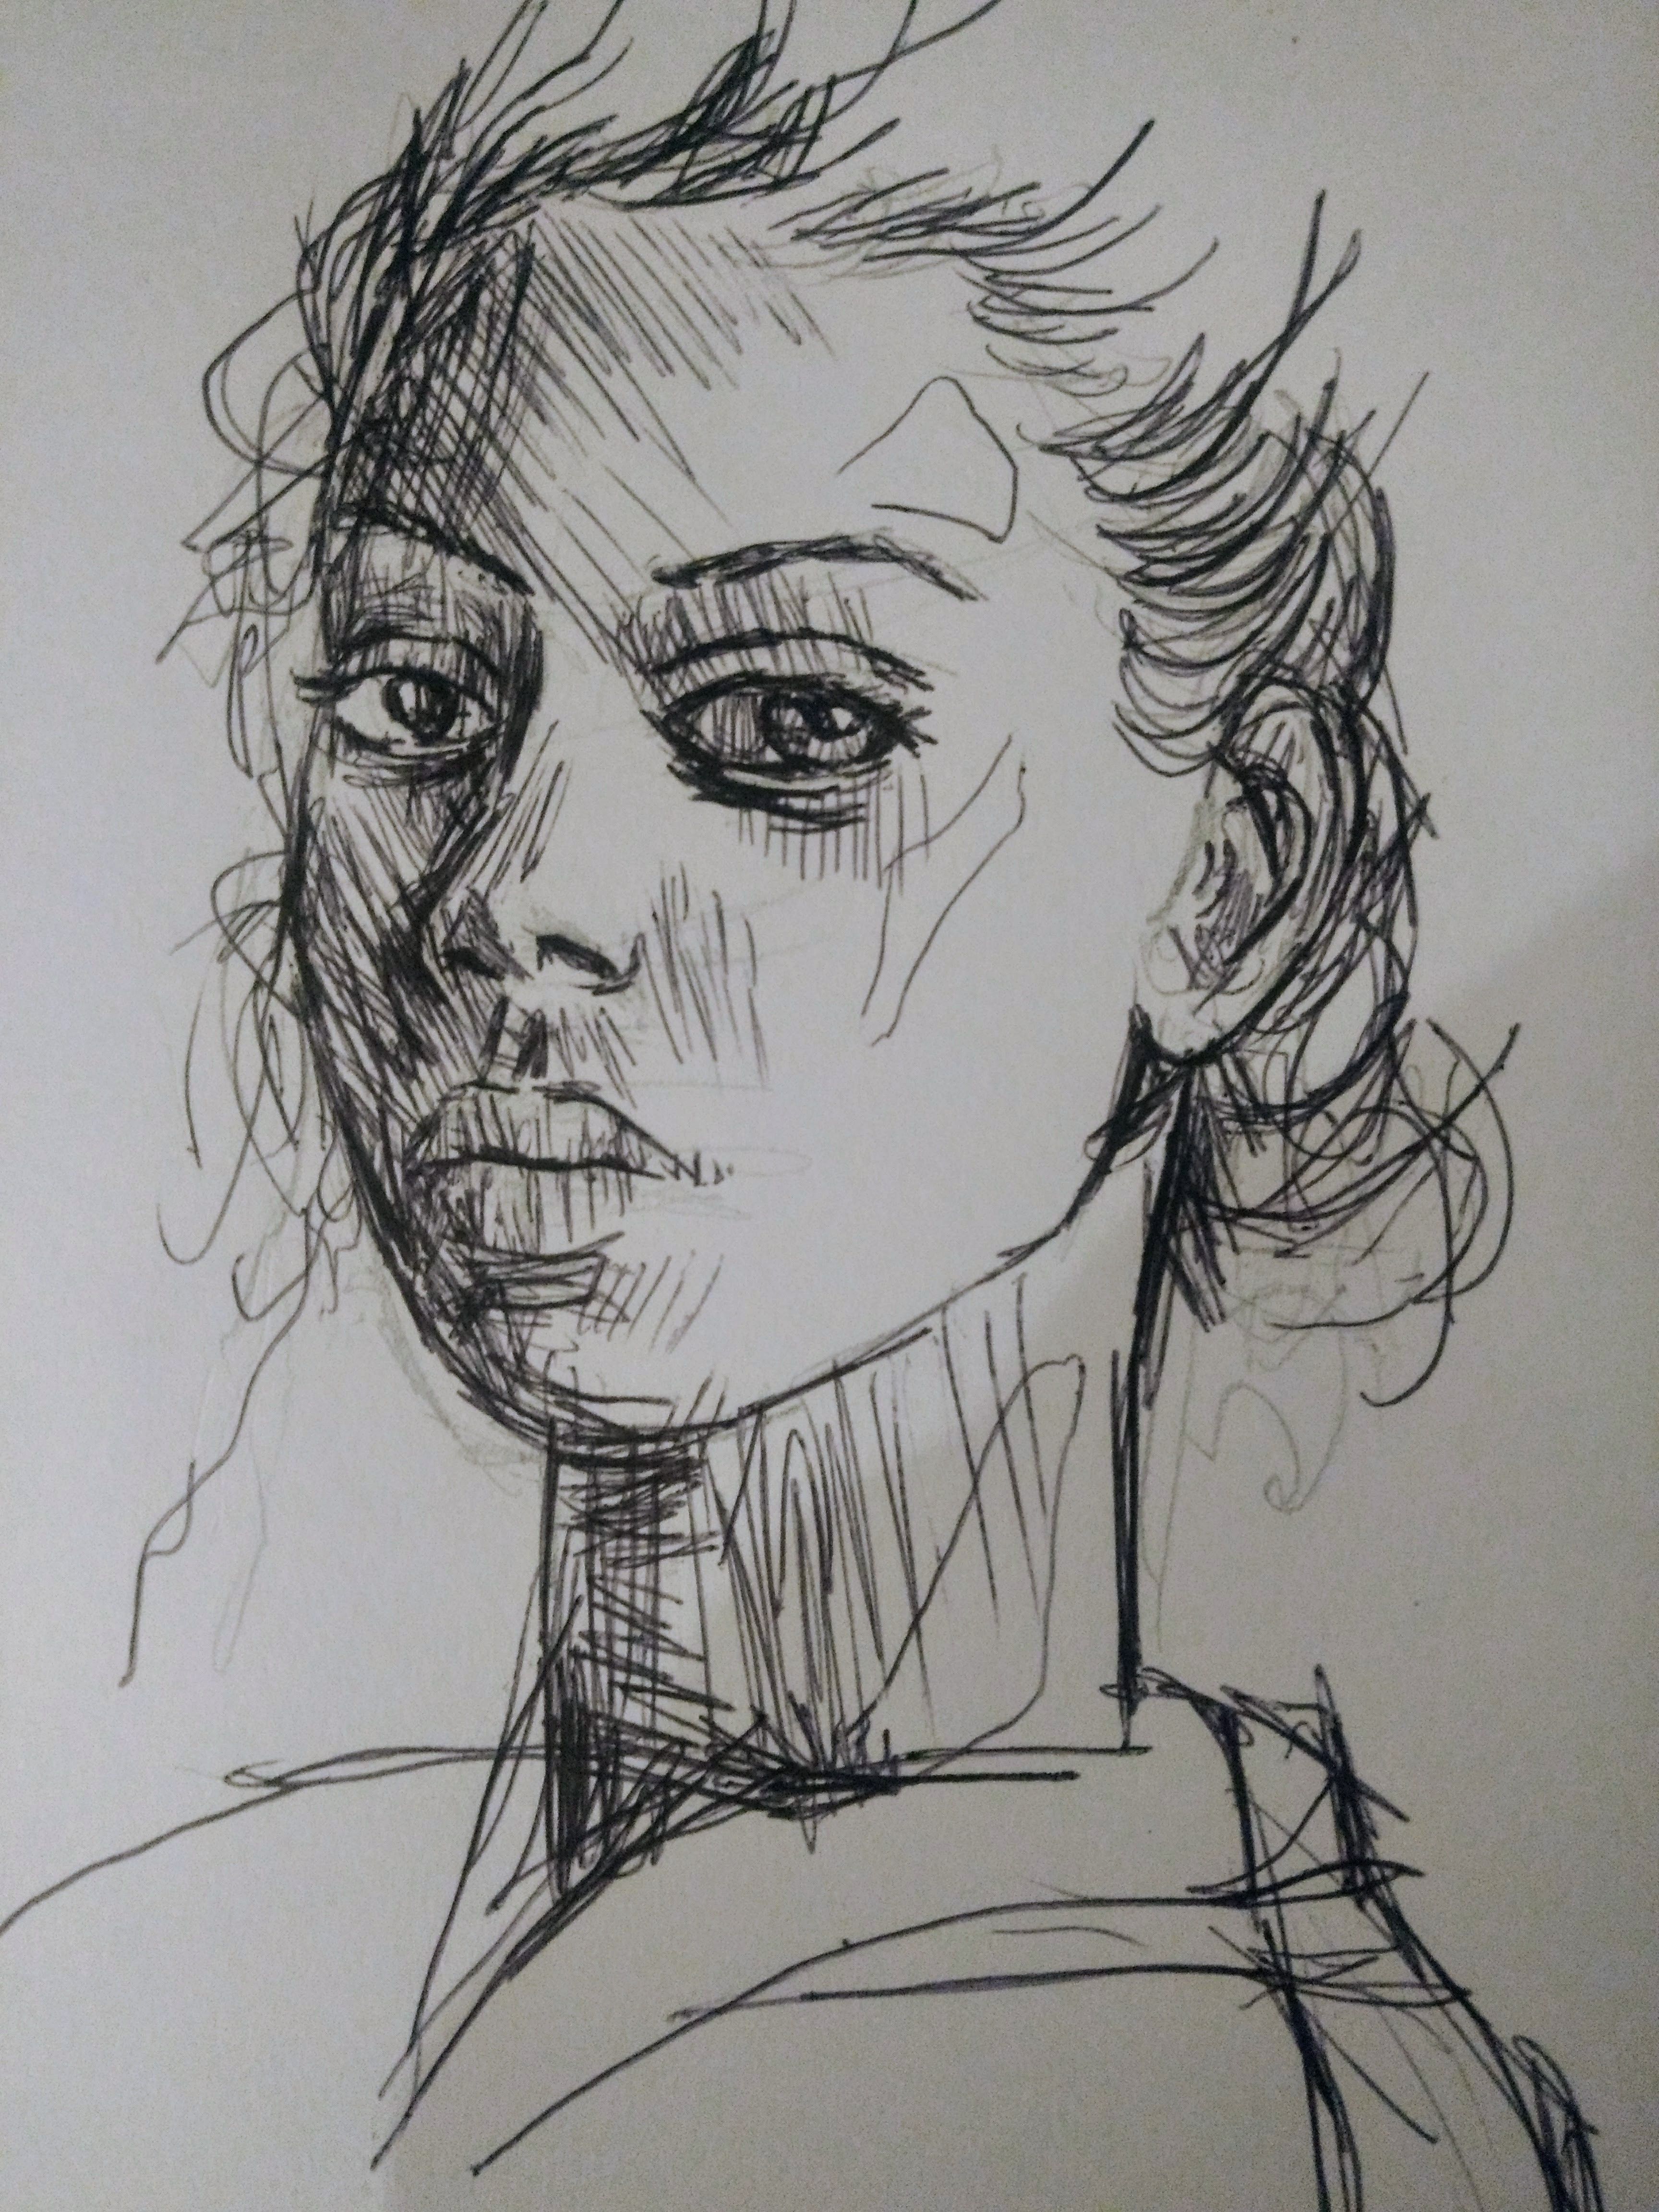 Pen Portrait Drawing At Paintingvalley Com Explore Collection Of Images, Photos, Reviews